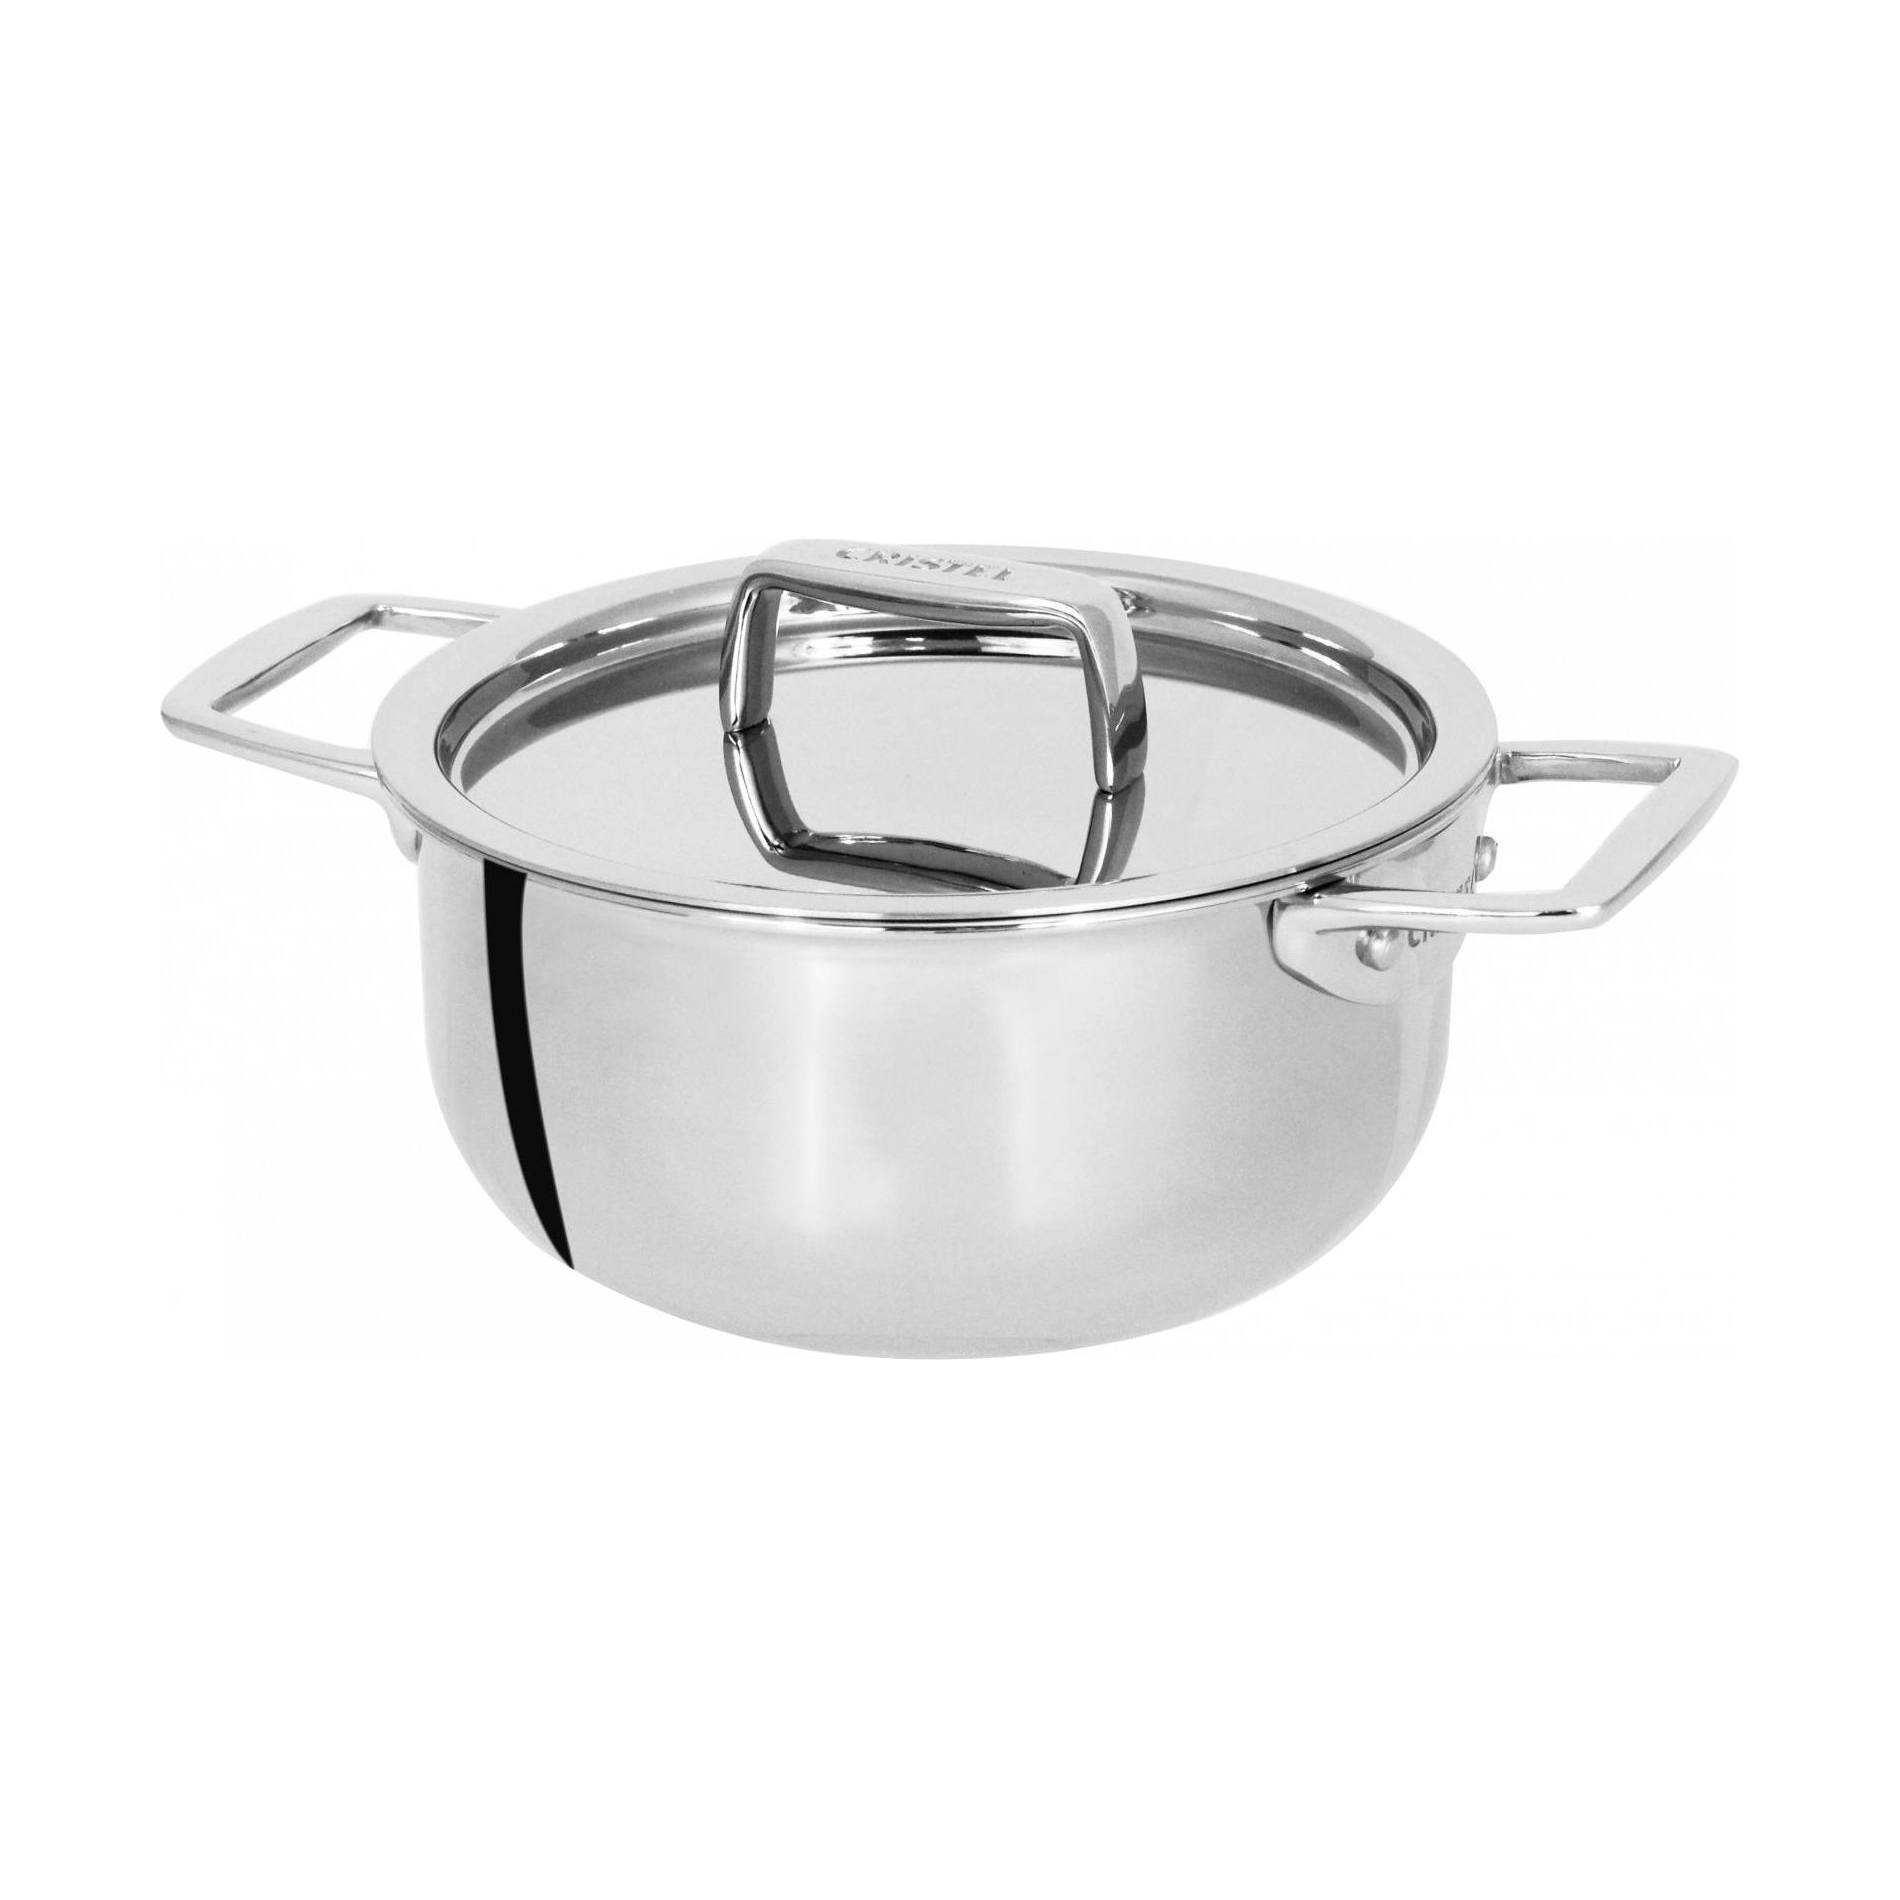 Castel Pro stewpan with lid 12 cm stainless steel Cristel